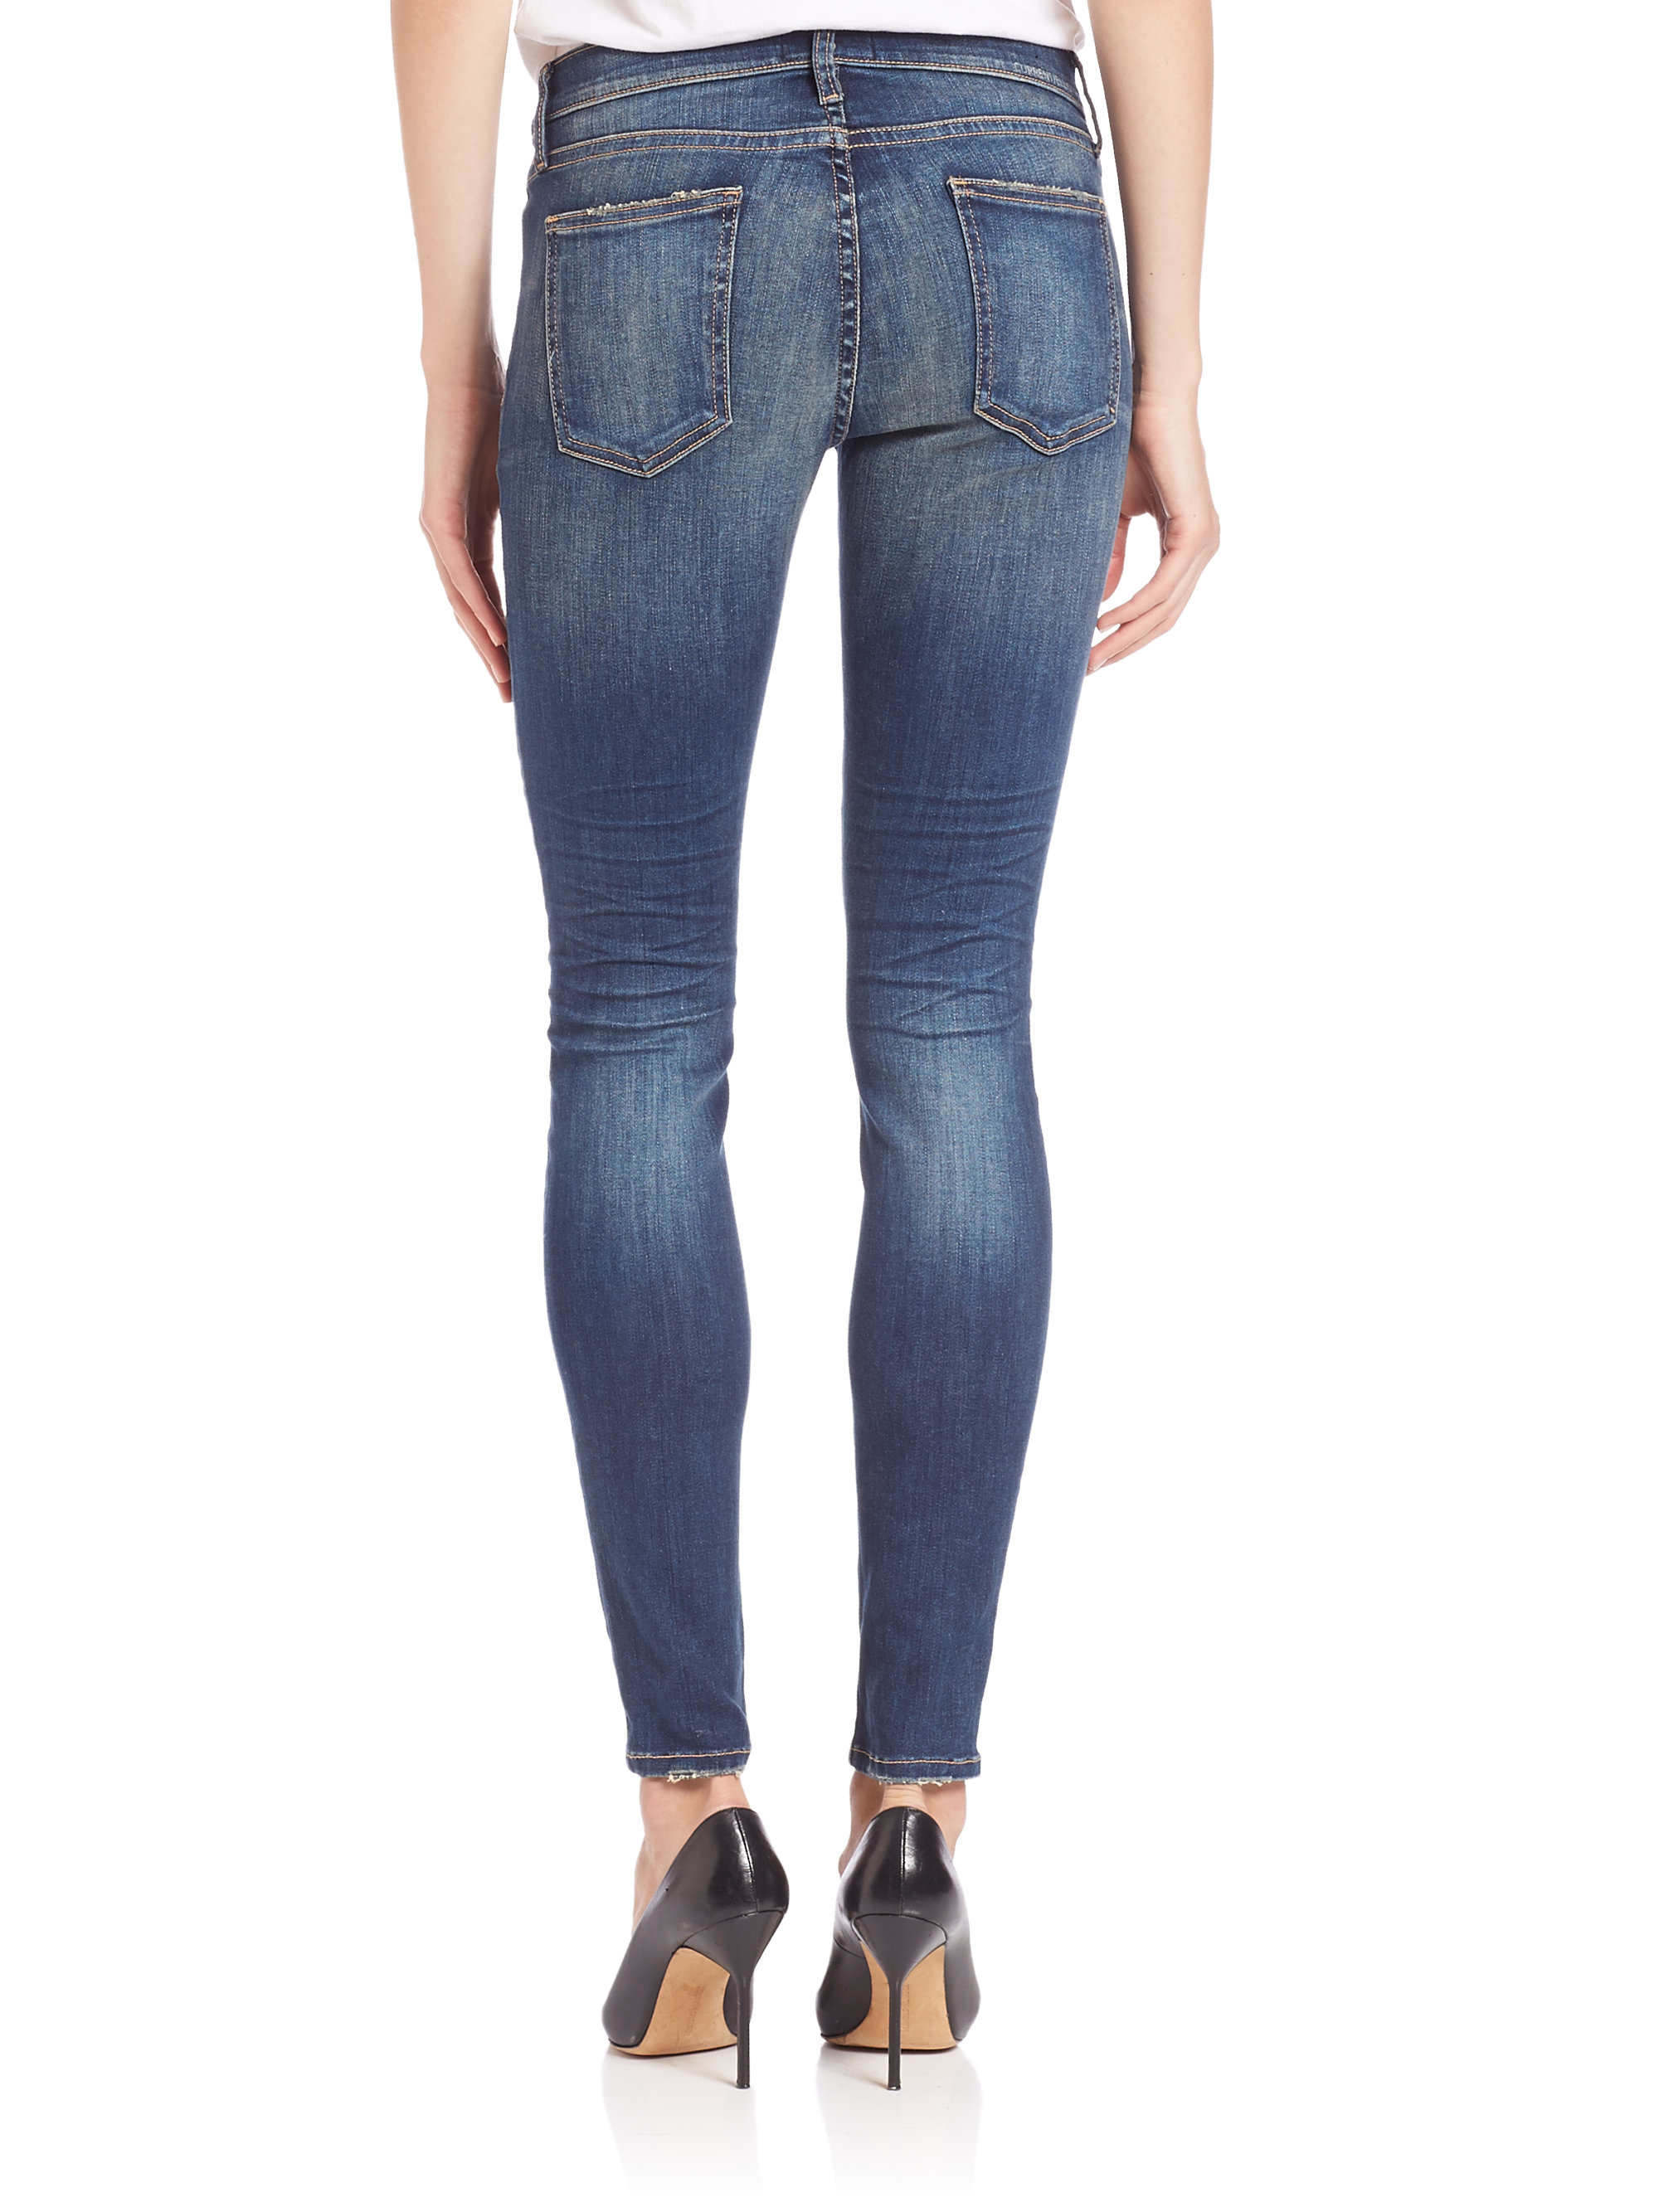 Lyst - Current/Elliott The Ankle Skinny Jeans in Blue